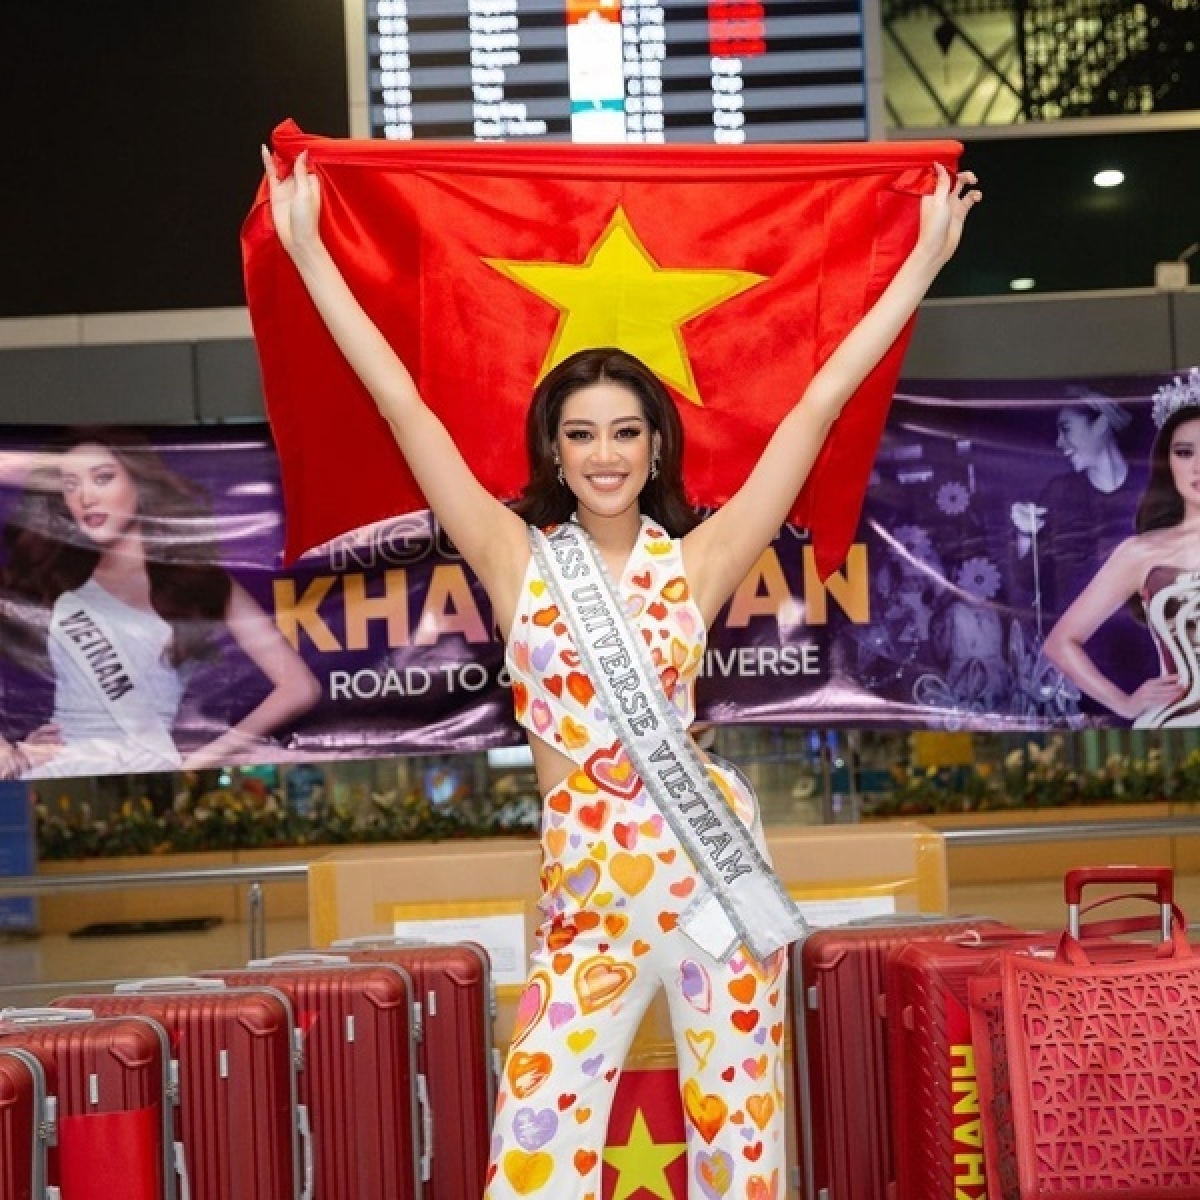 khanh van looks confident in us for miss universe 2020 picture 10